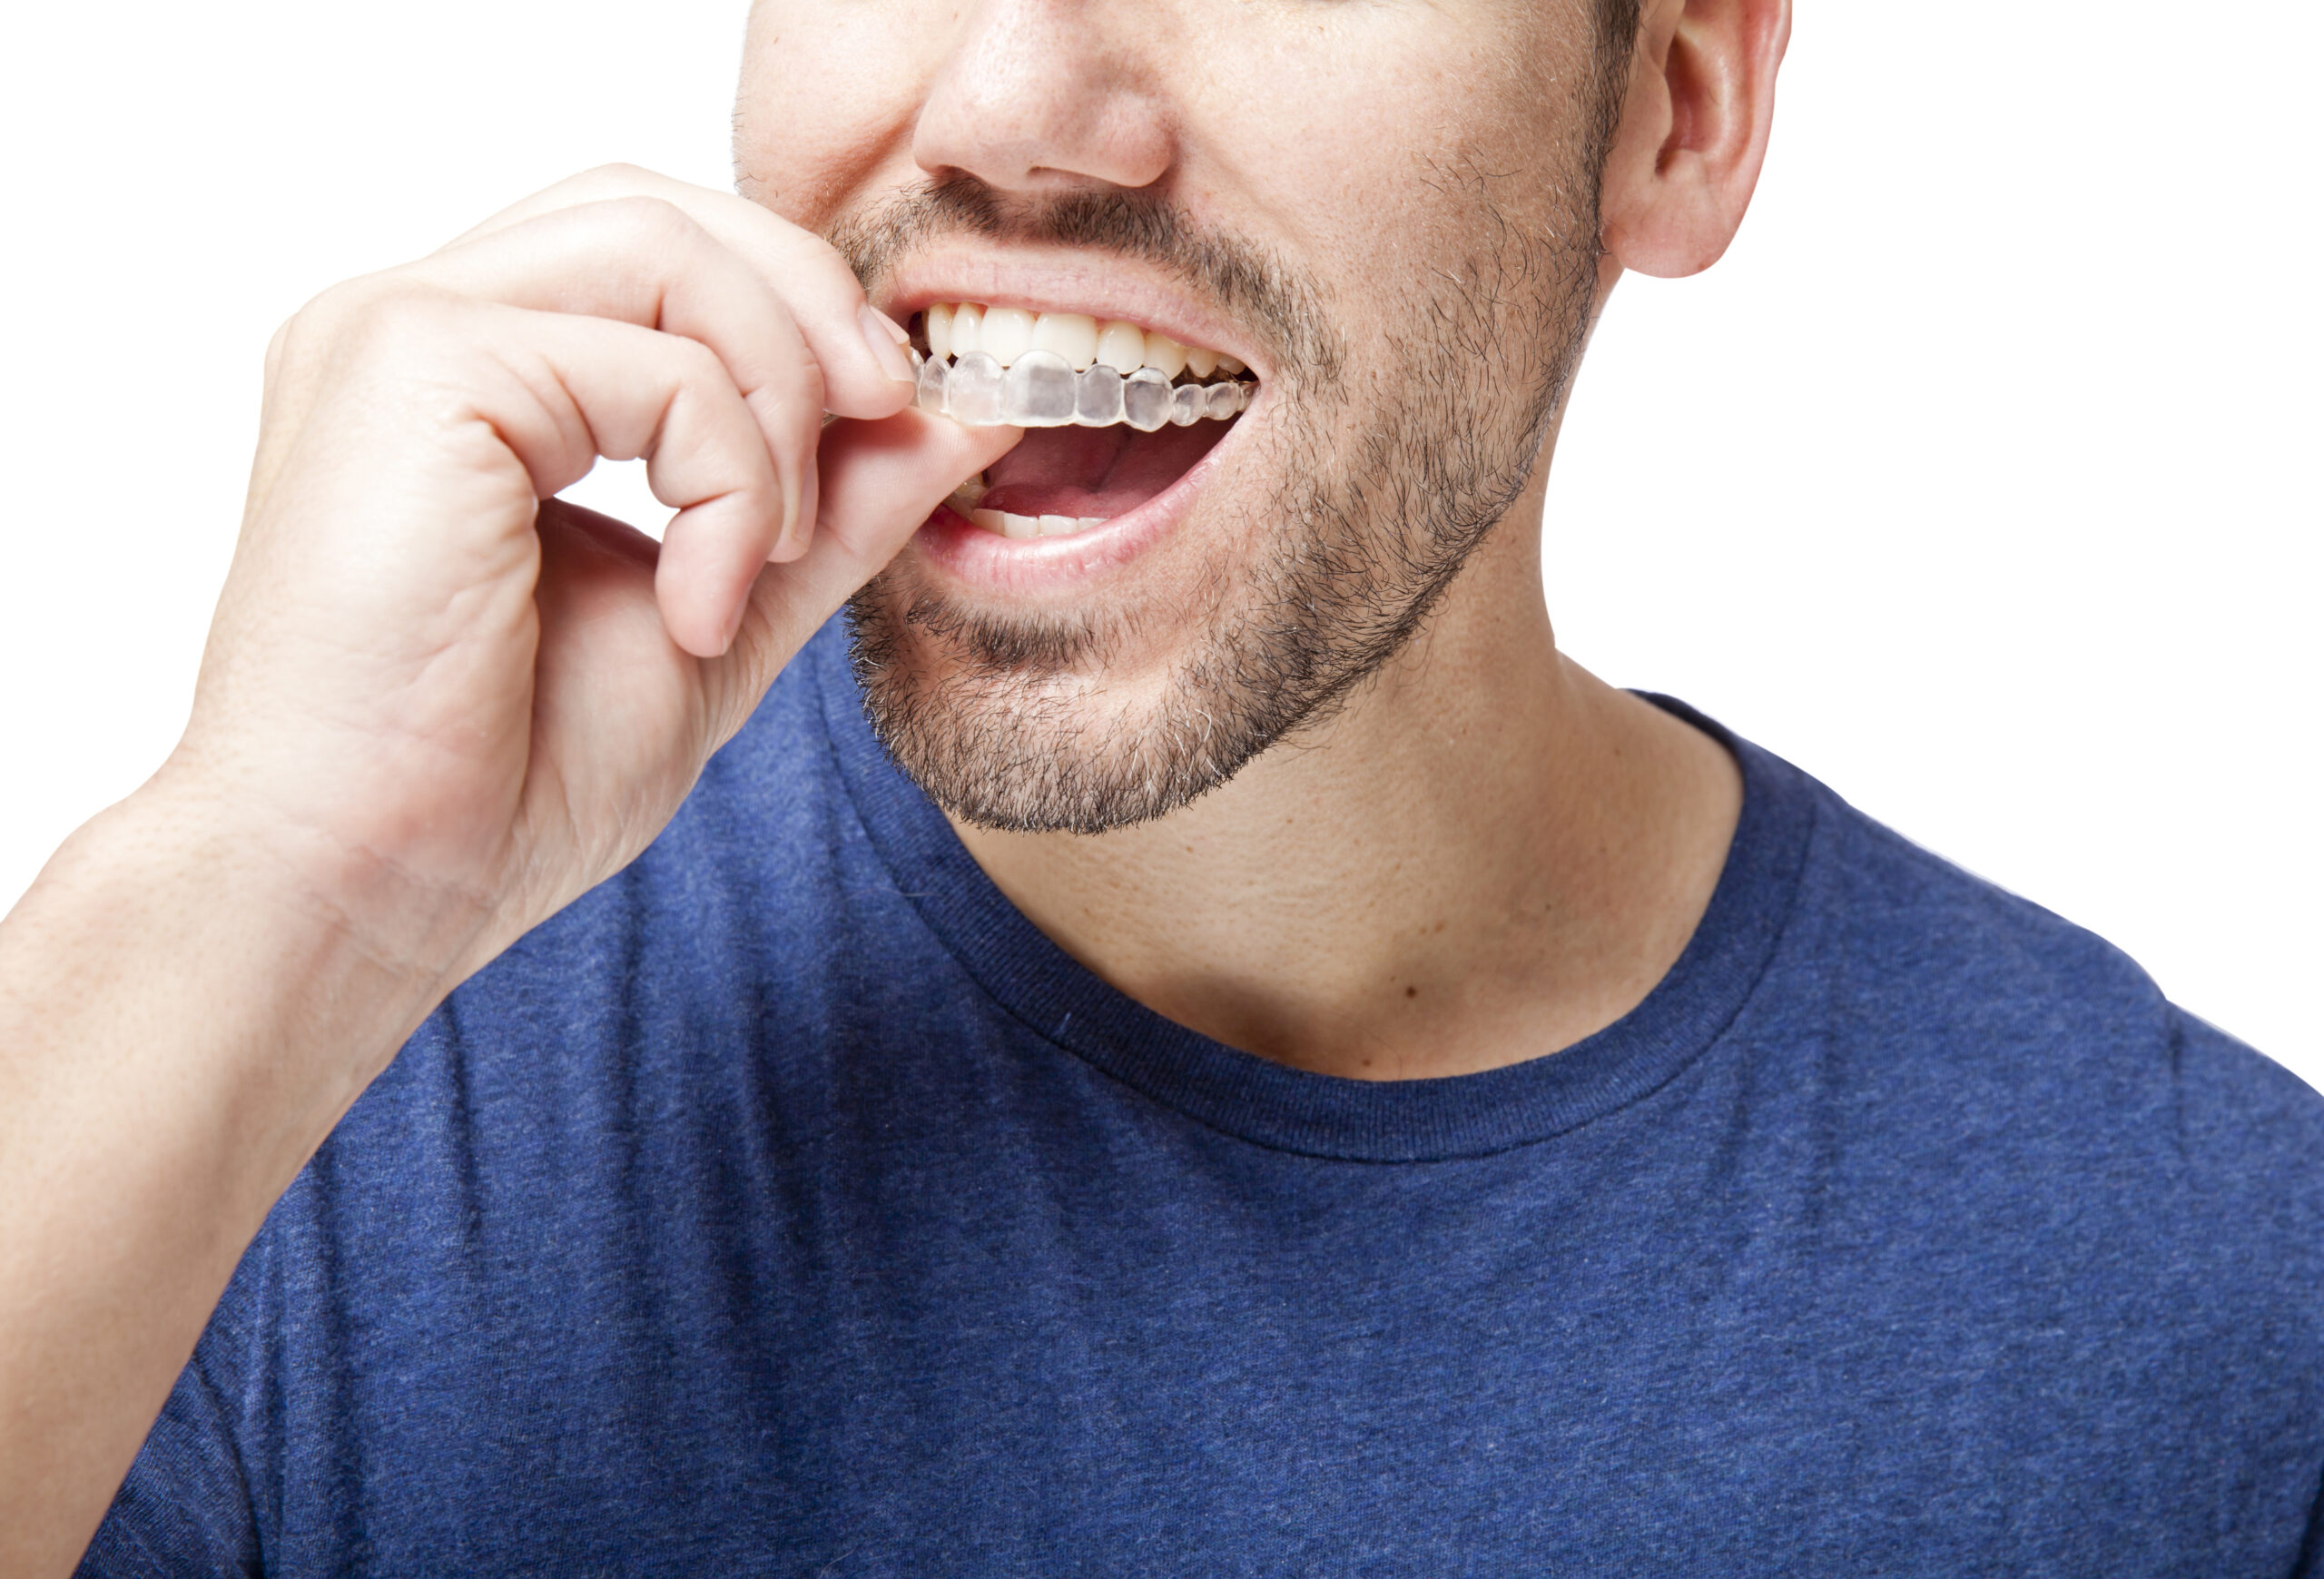 Four Things You Shouldn't Do to Achieve a Successful Invisalign